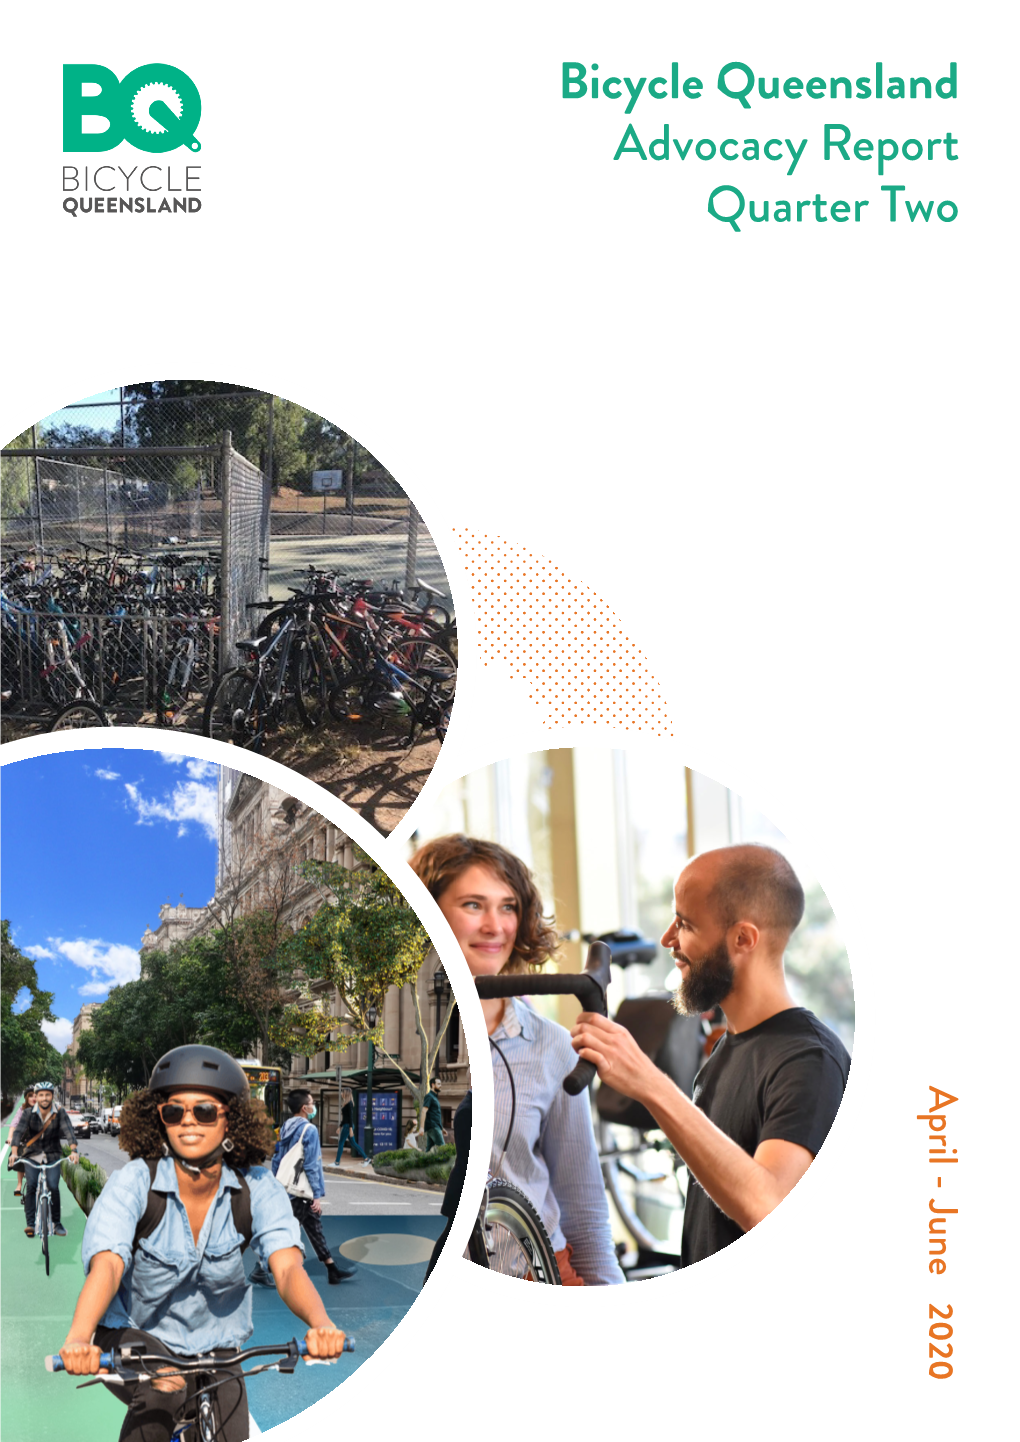 Bicycle Queensland Advocacy Report Quarter Two April - June 2020 Quarterly Advocacy Update, June 2020